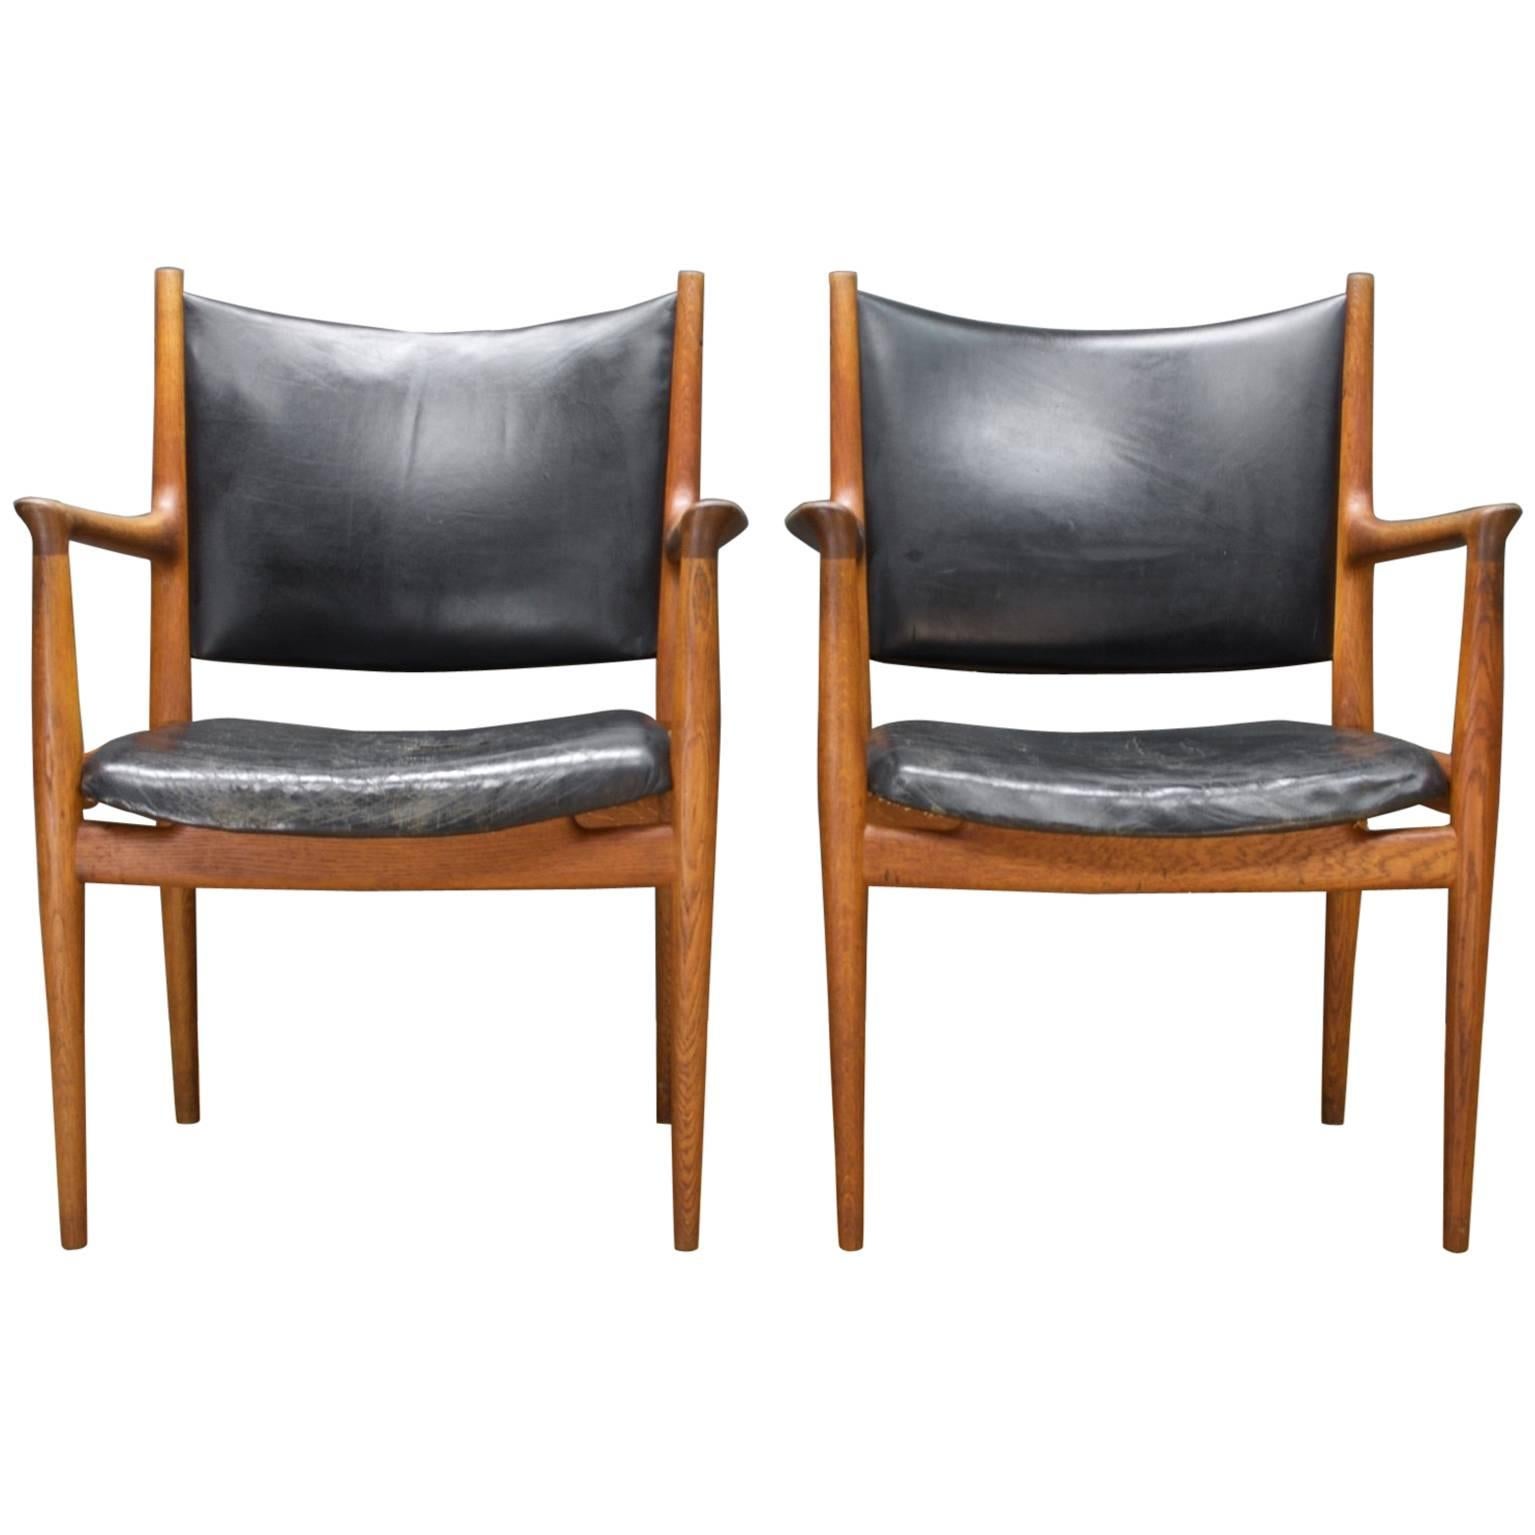 Pair of Heavily Patinated Hans Wegner Leather Armchairs JH-513 Chairs Rare Oak